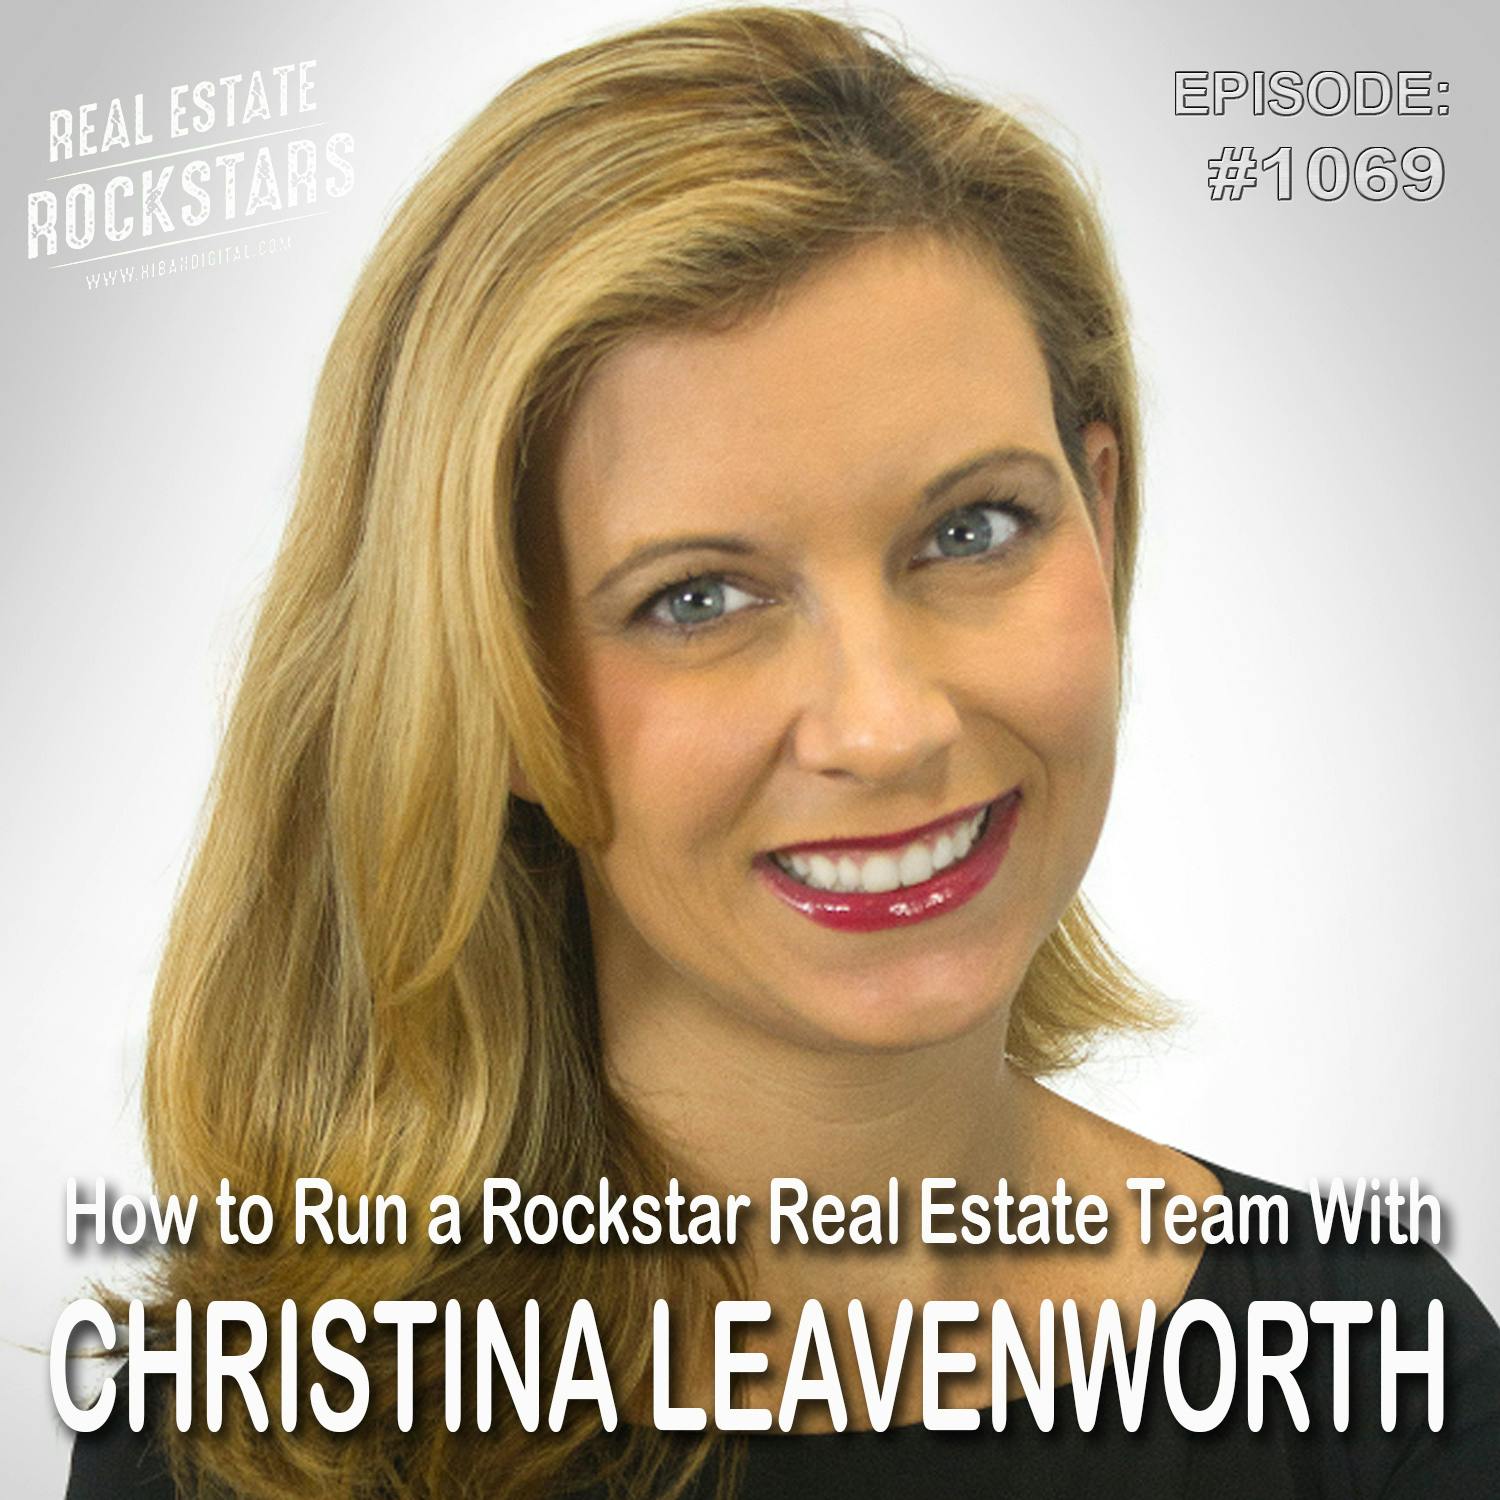 1069: How to Run a Rockstar Real Estate Team With Christina Leavenworth